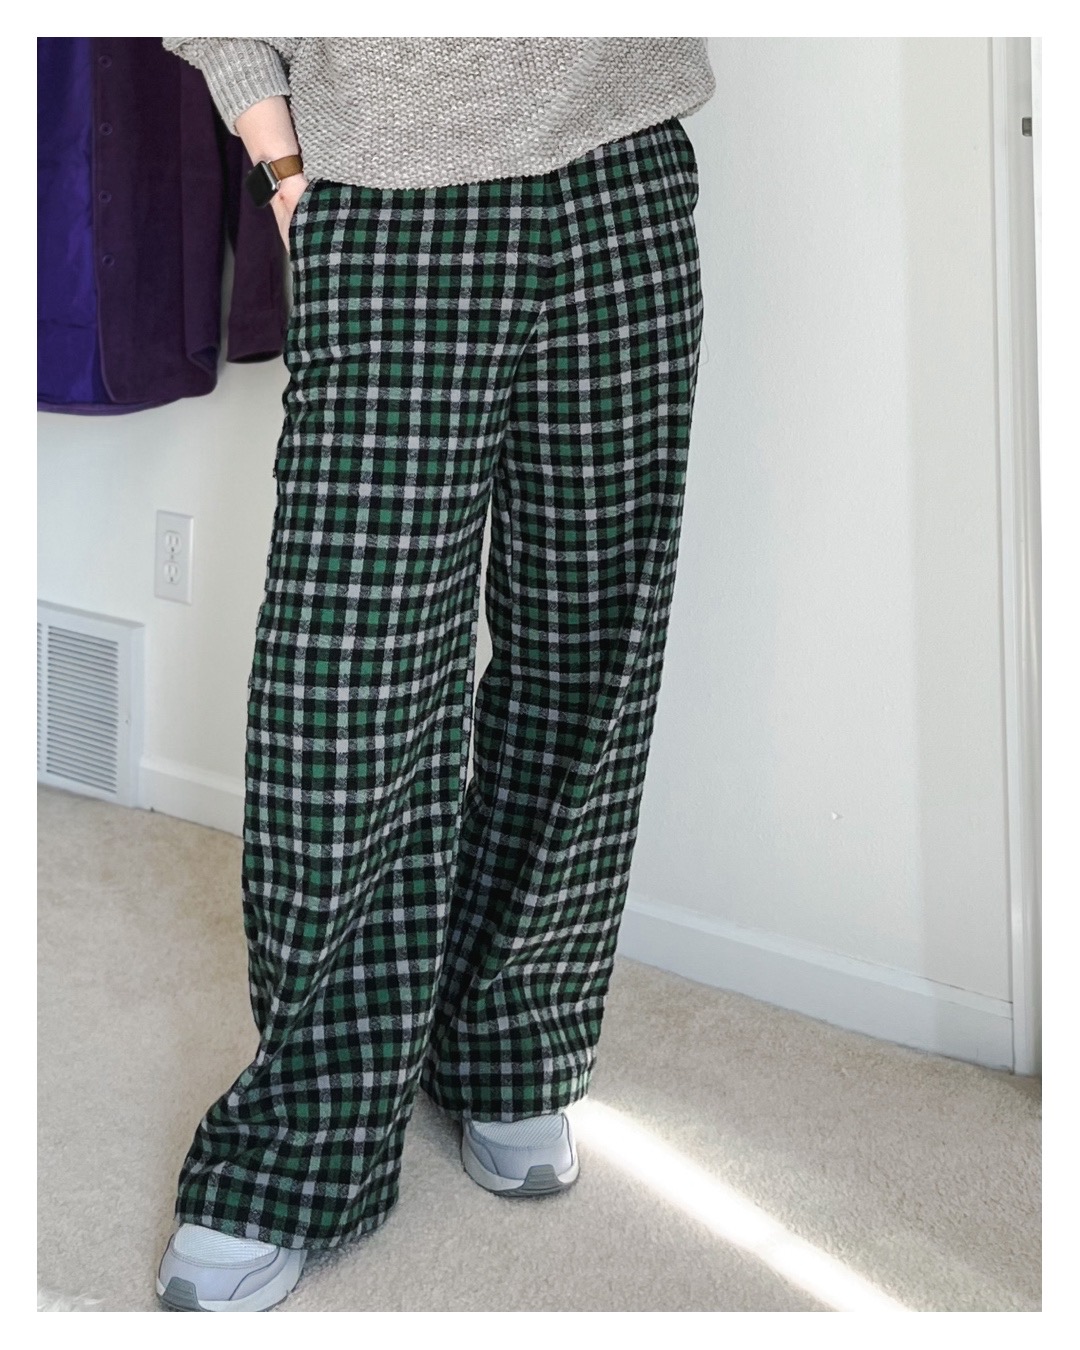 Stop the press – Coolest pant sewing pattern in town is here!